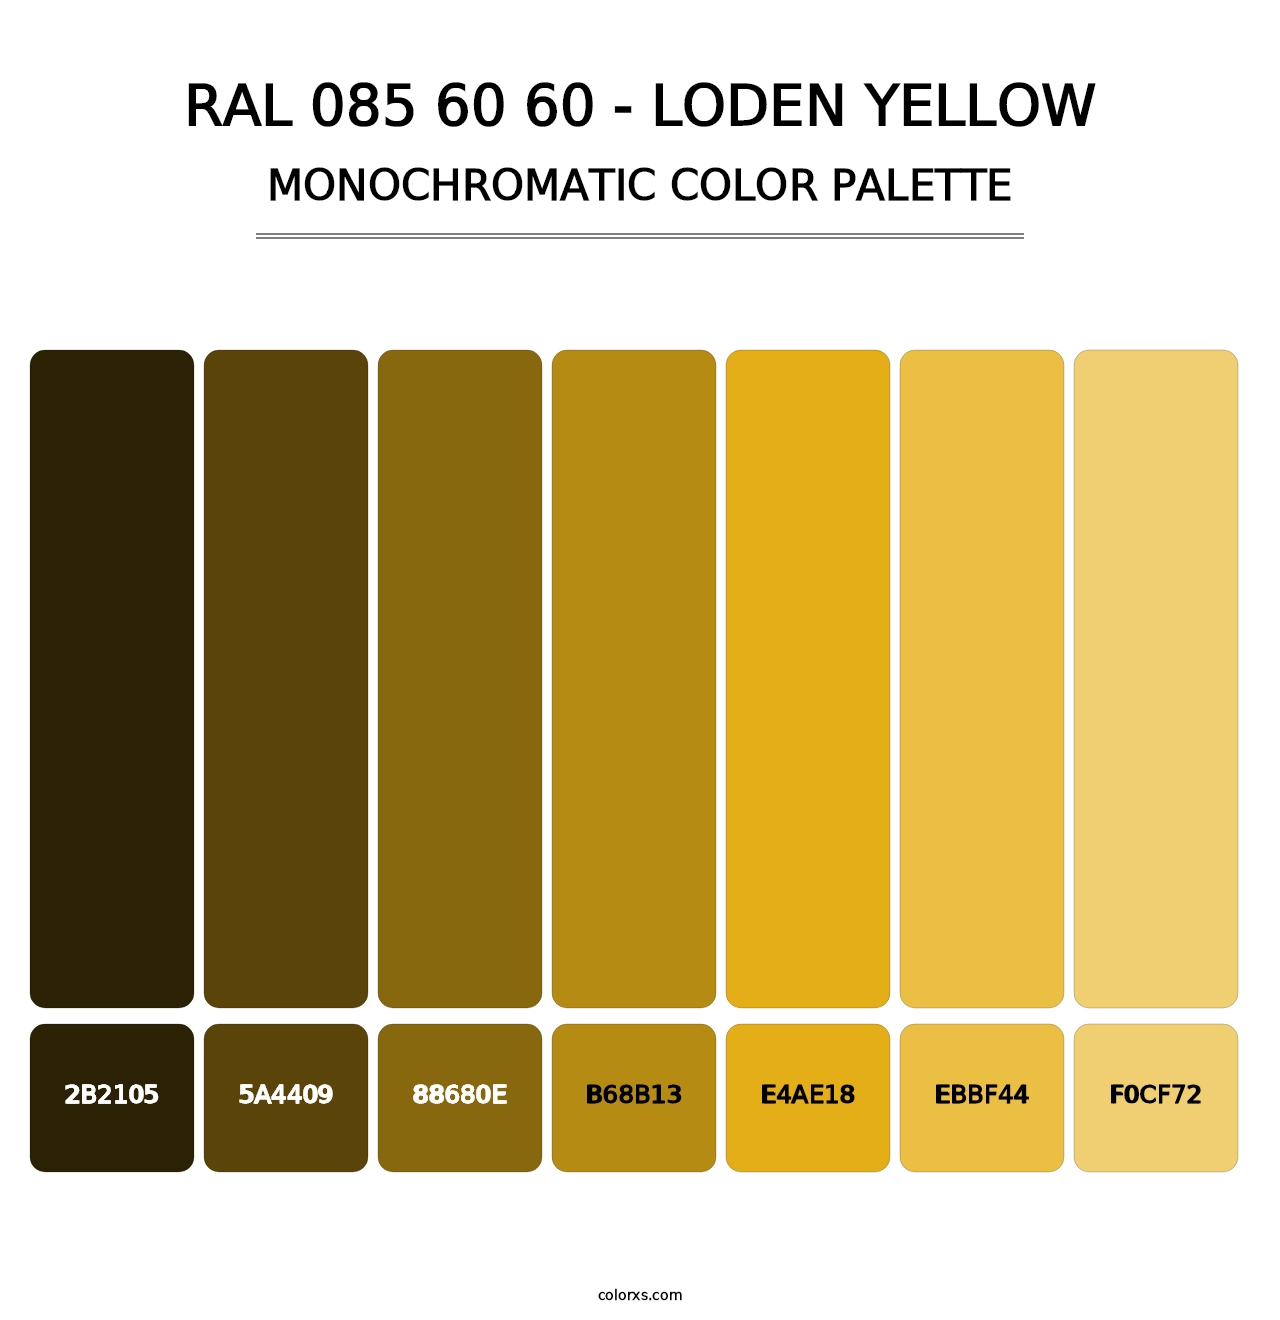 RAL 085 60 60 - Loden Yellow - Monochromatic Color Palette